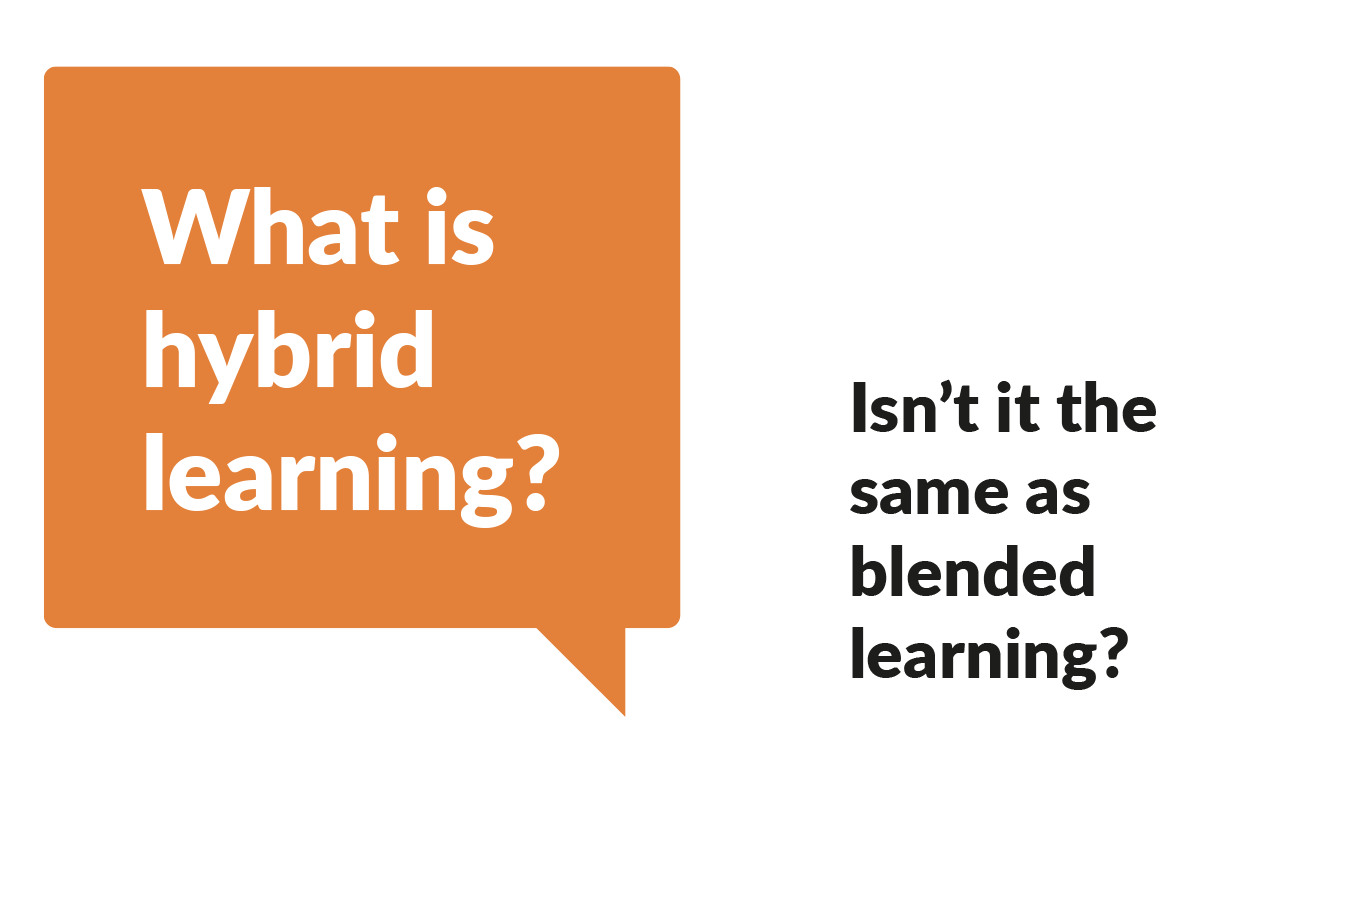 What is hybrid learning? Isn't it the same as blended learning?